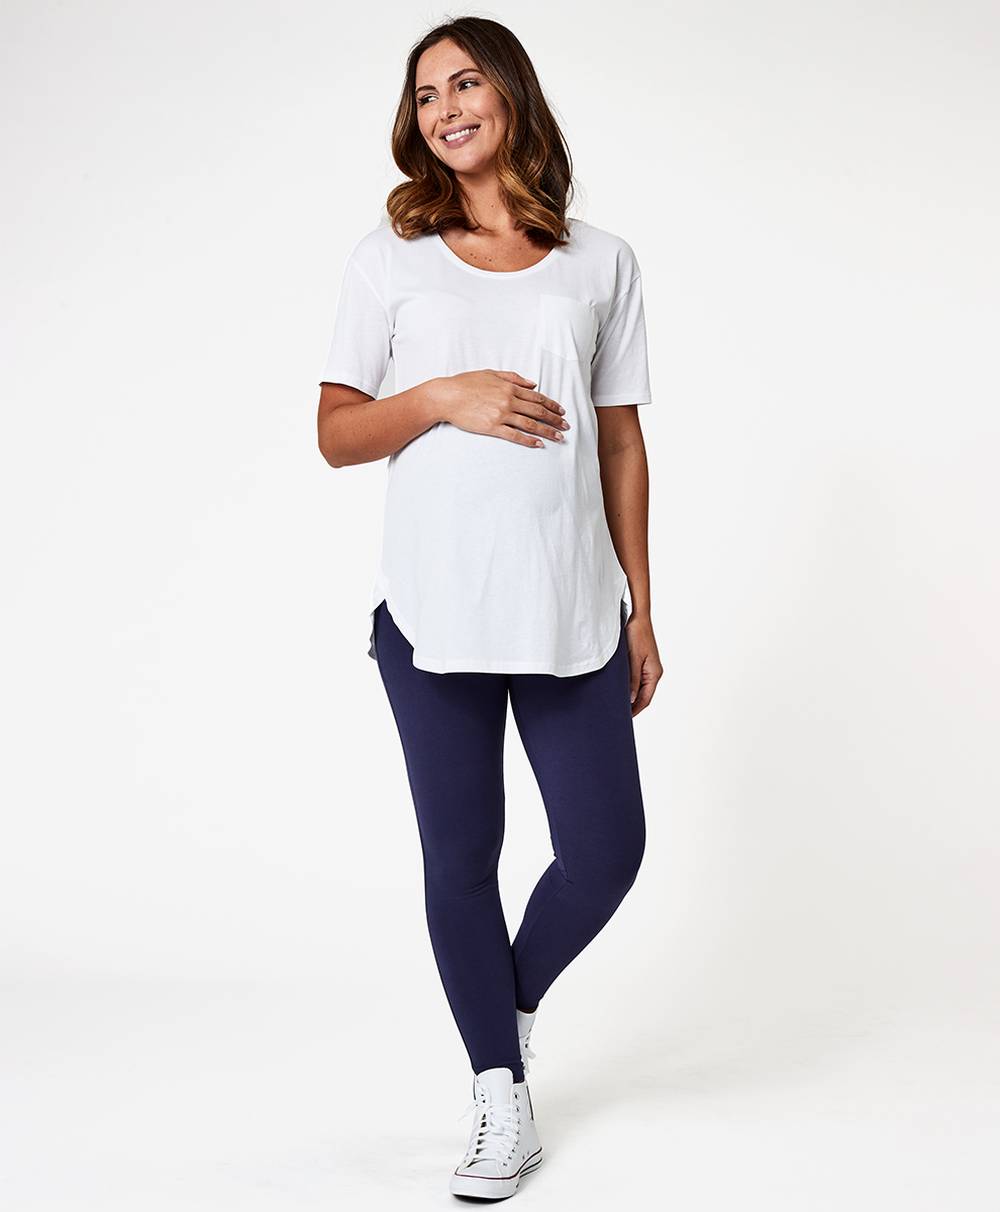 pact affordable maternity clothes